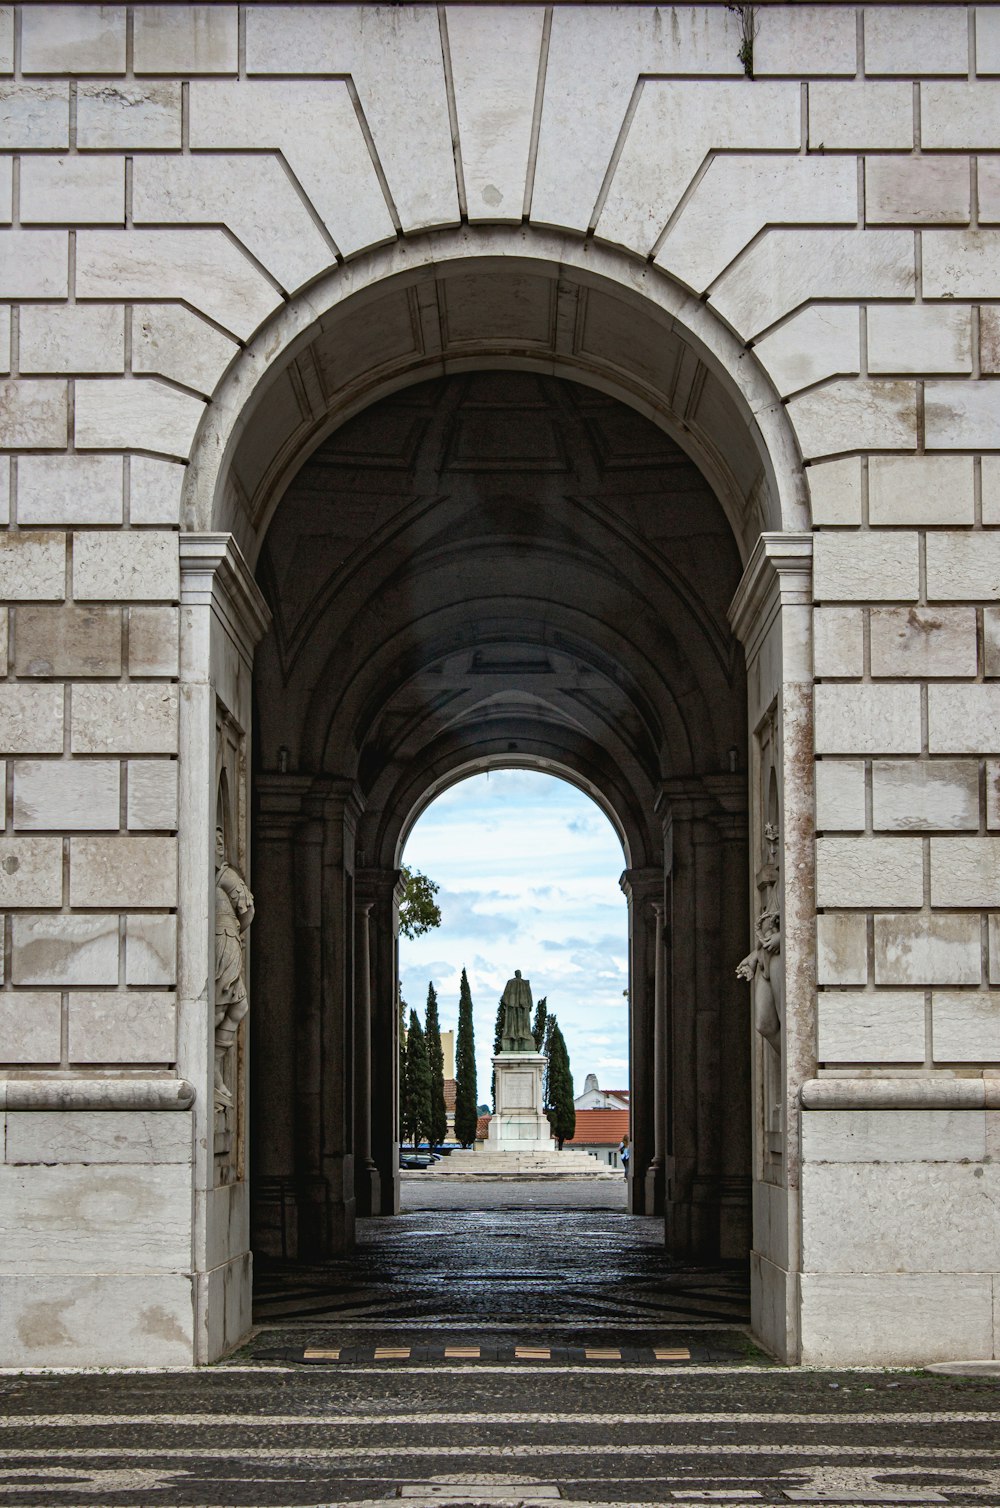 a stone archway with a street and trees in the background